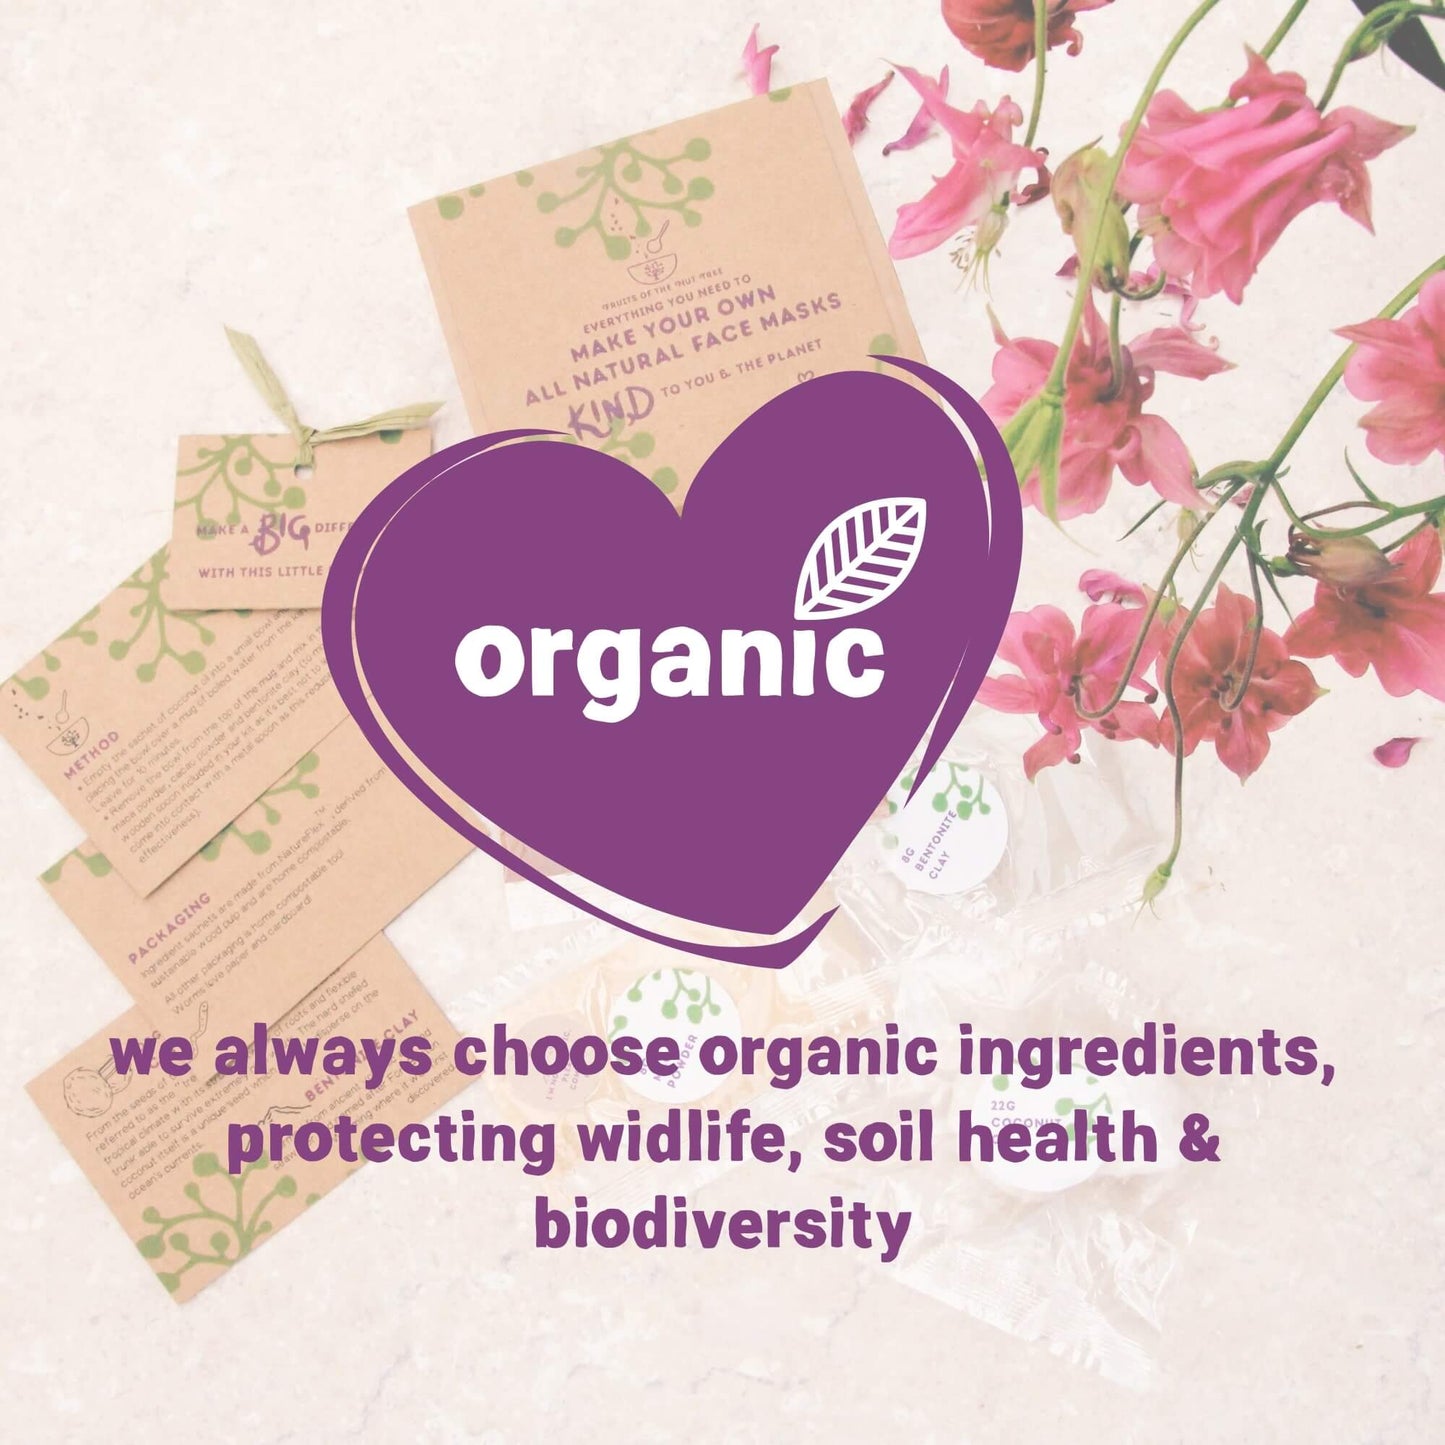 make your own face mask kit uses only organic ingredients to protect the environment